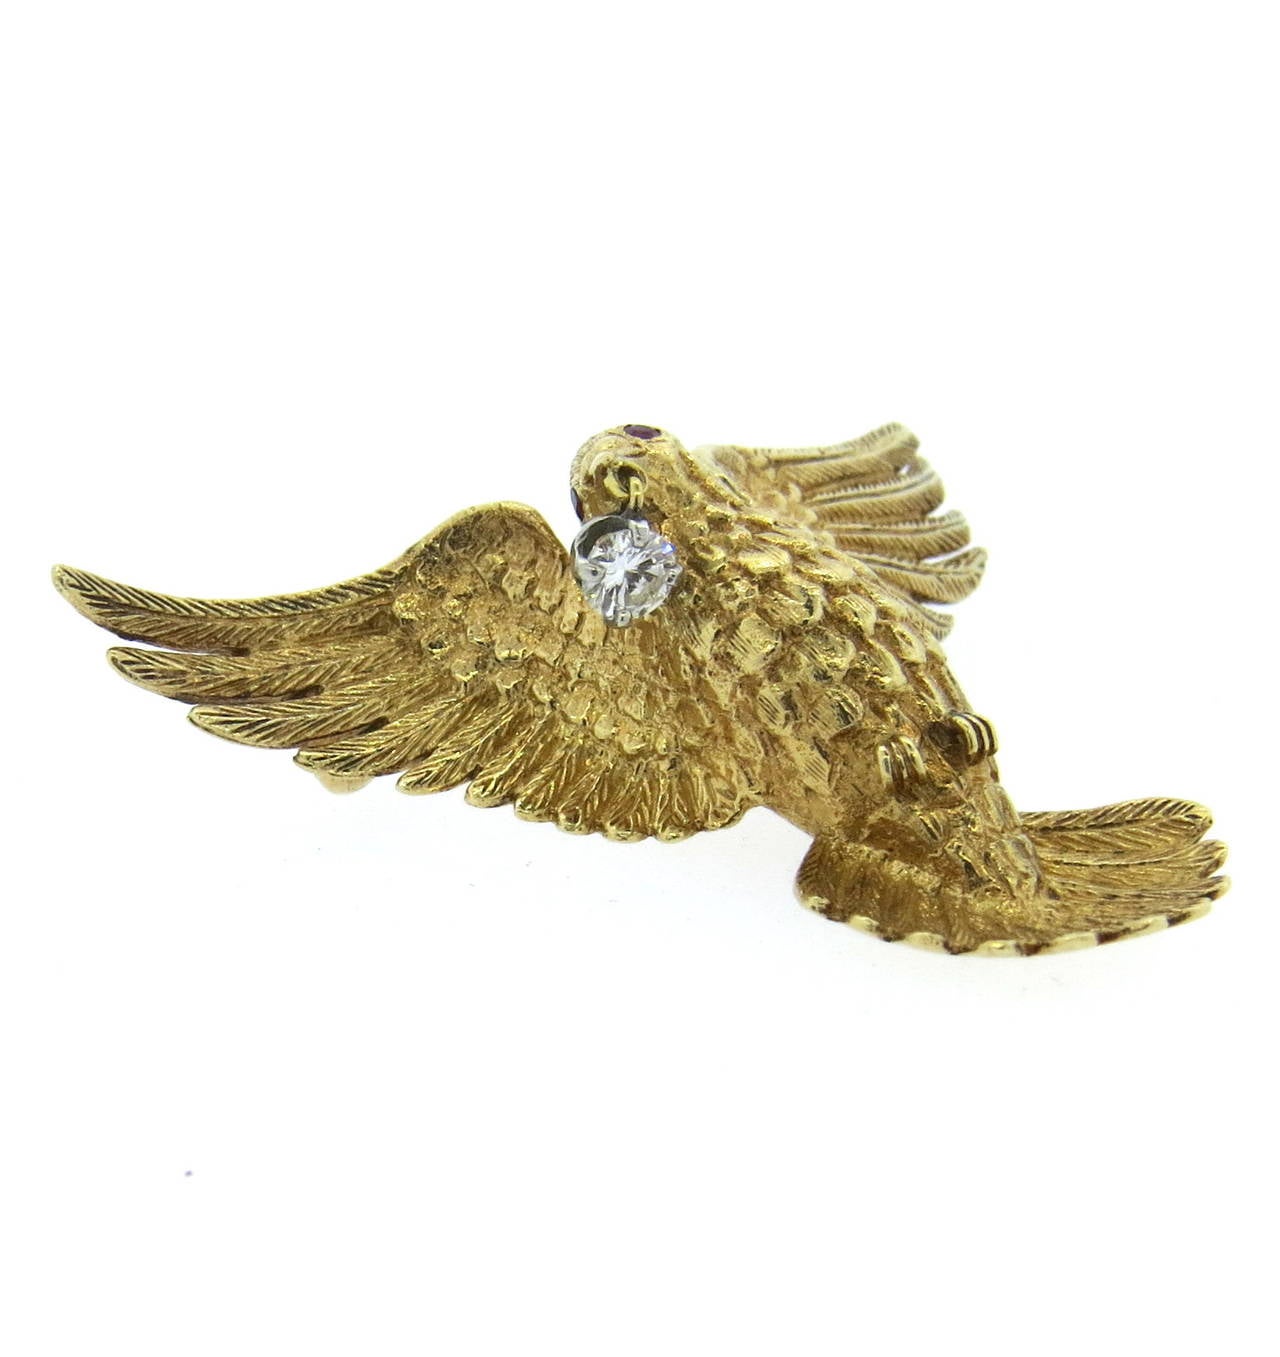 14k gold dove brooch, set with ruby eyes and one 0.18ct diamond. Brooch measures 40mm x 40mm. Weight of the piece - 11.5gr